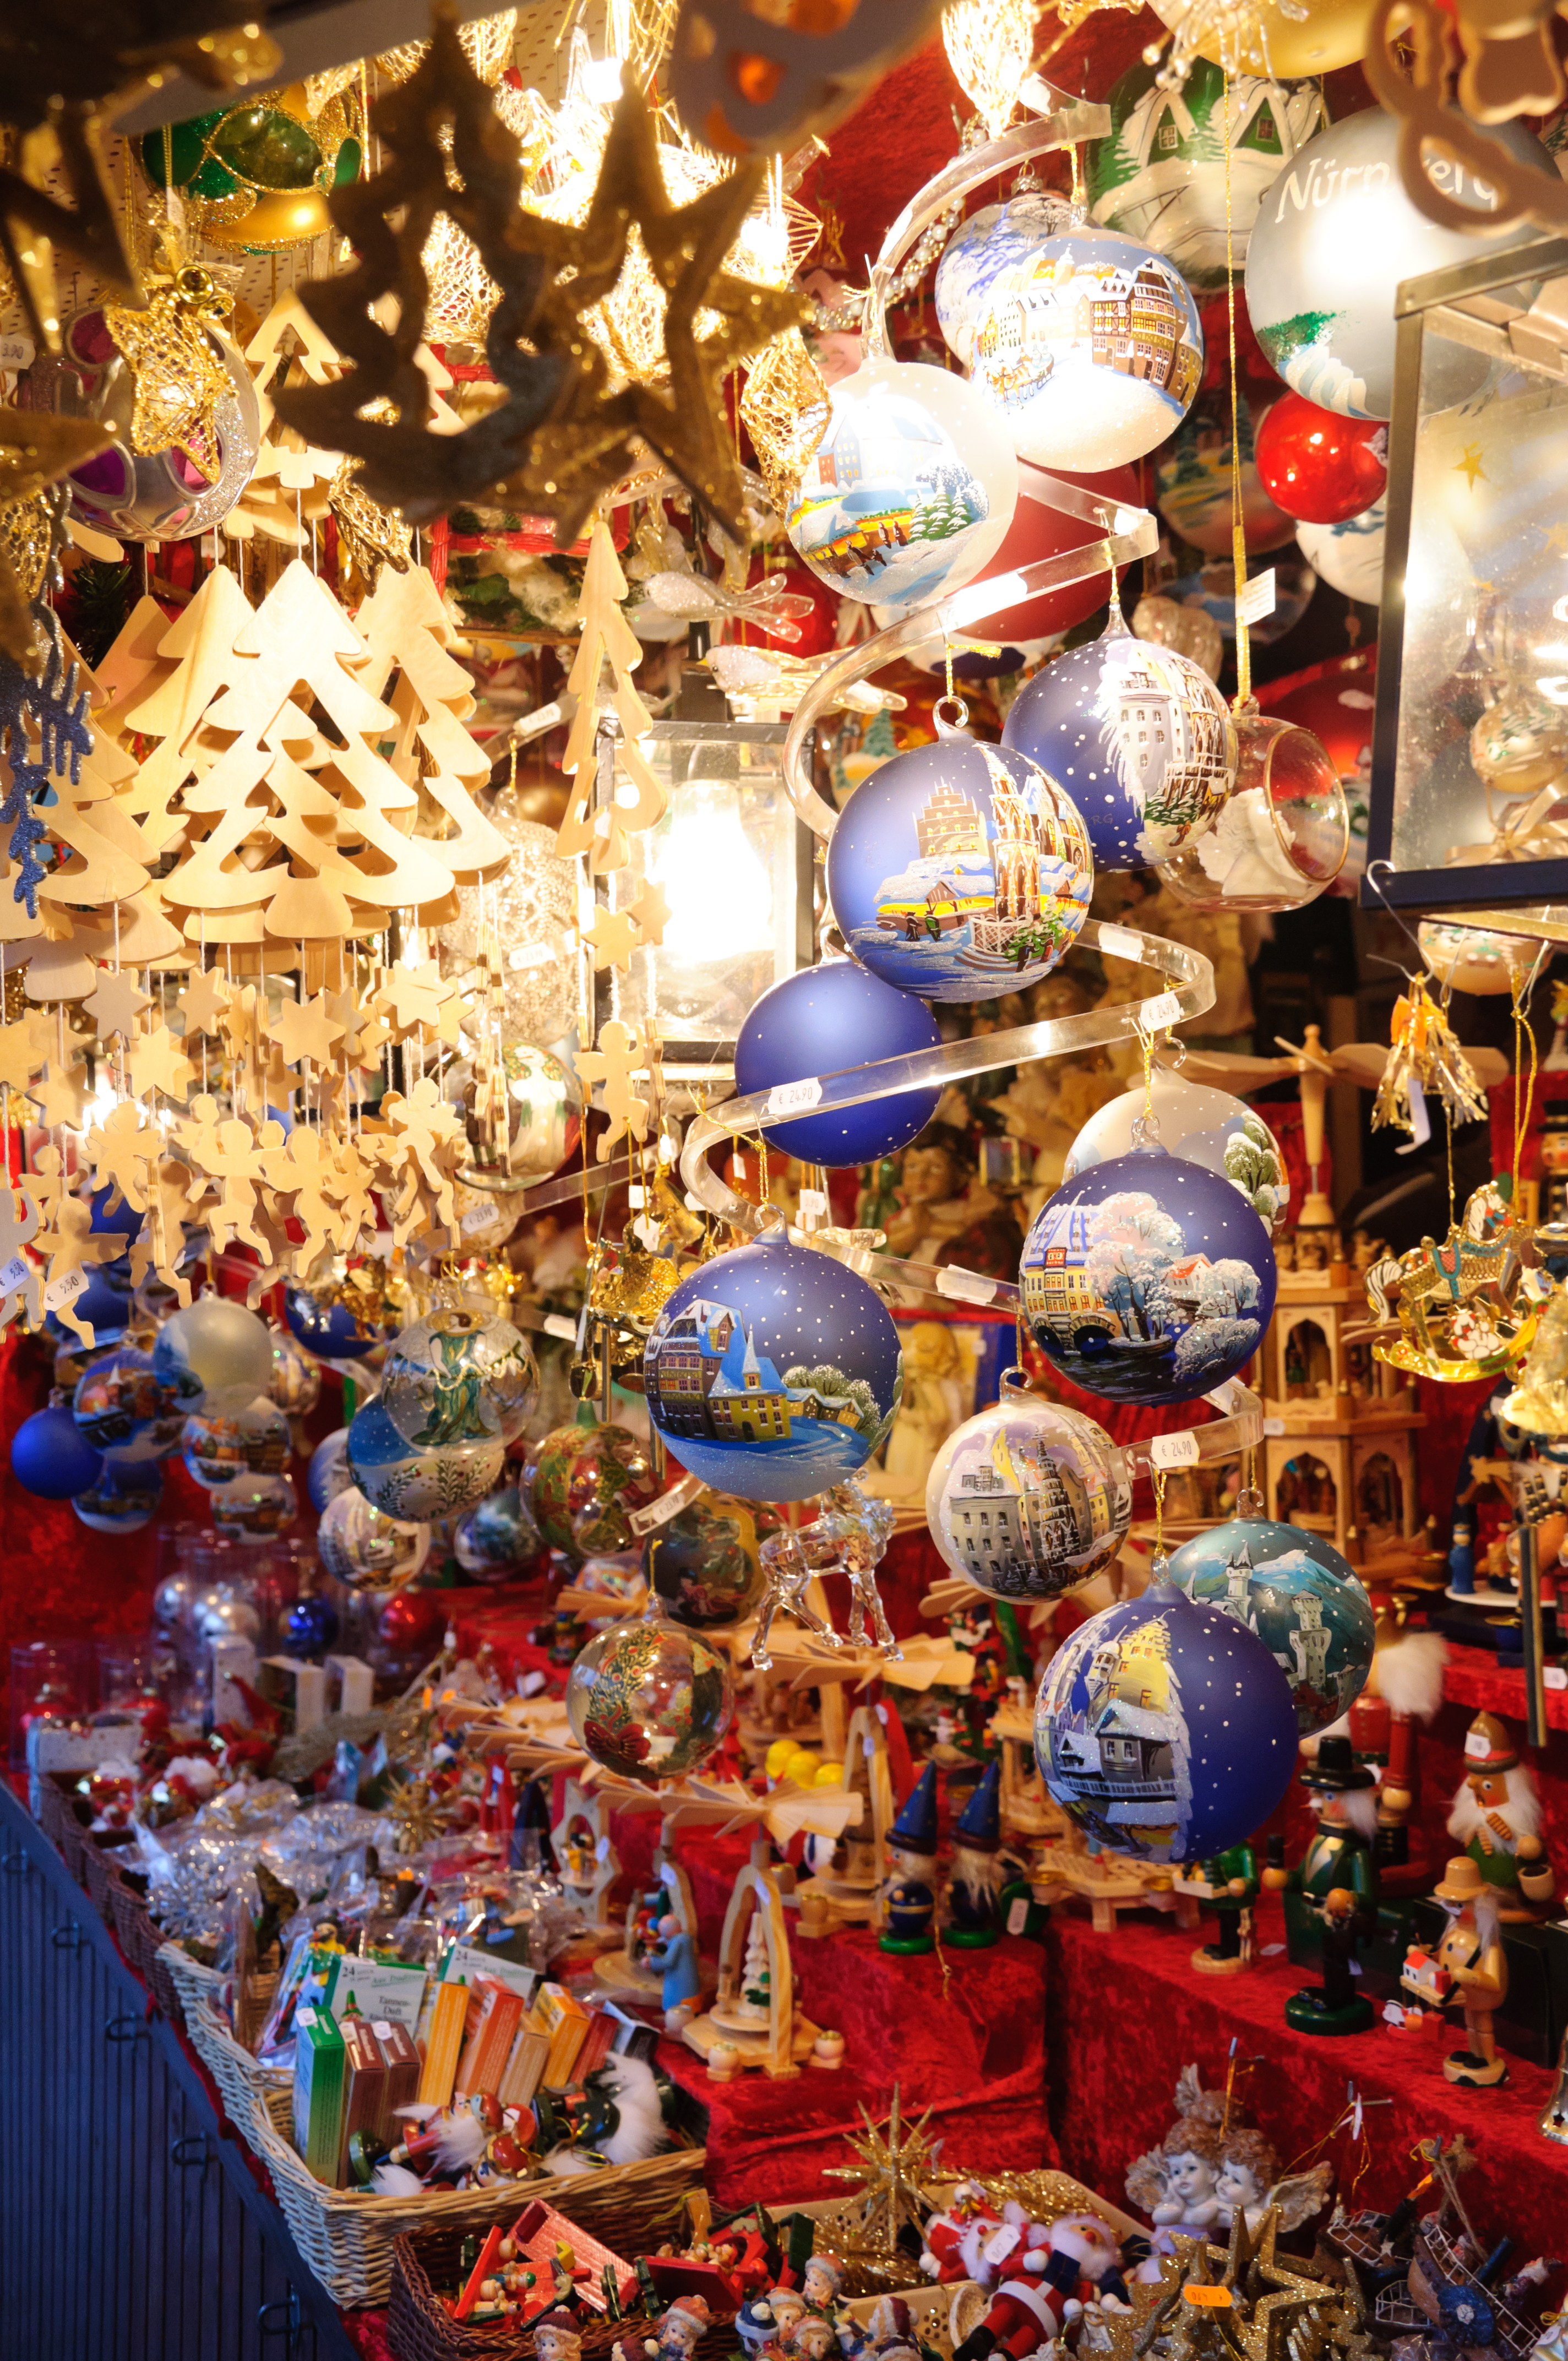 Classic Christmas markets in Germany